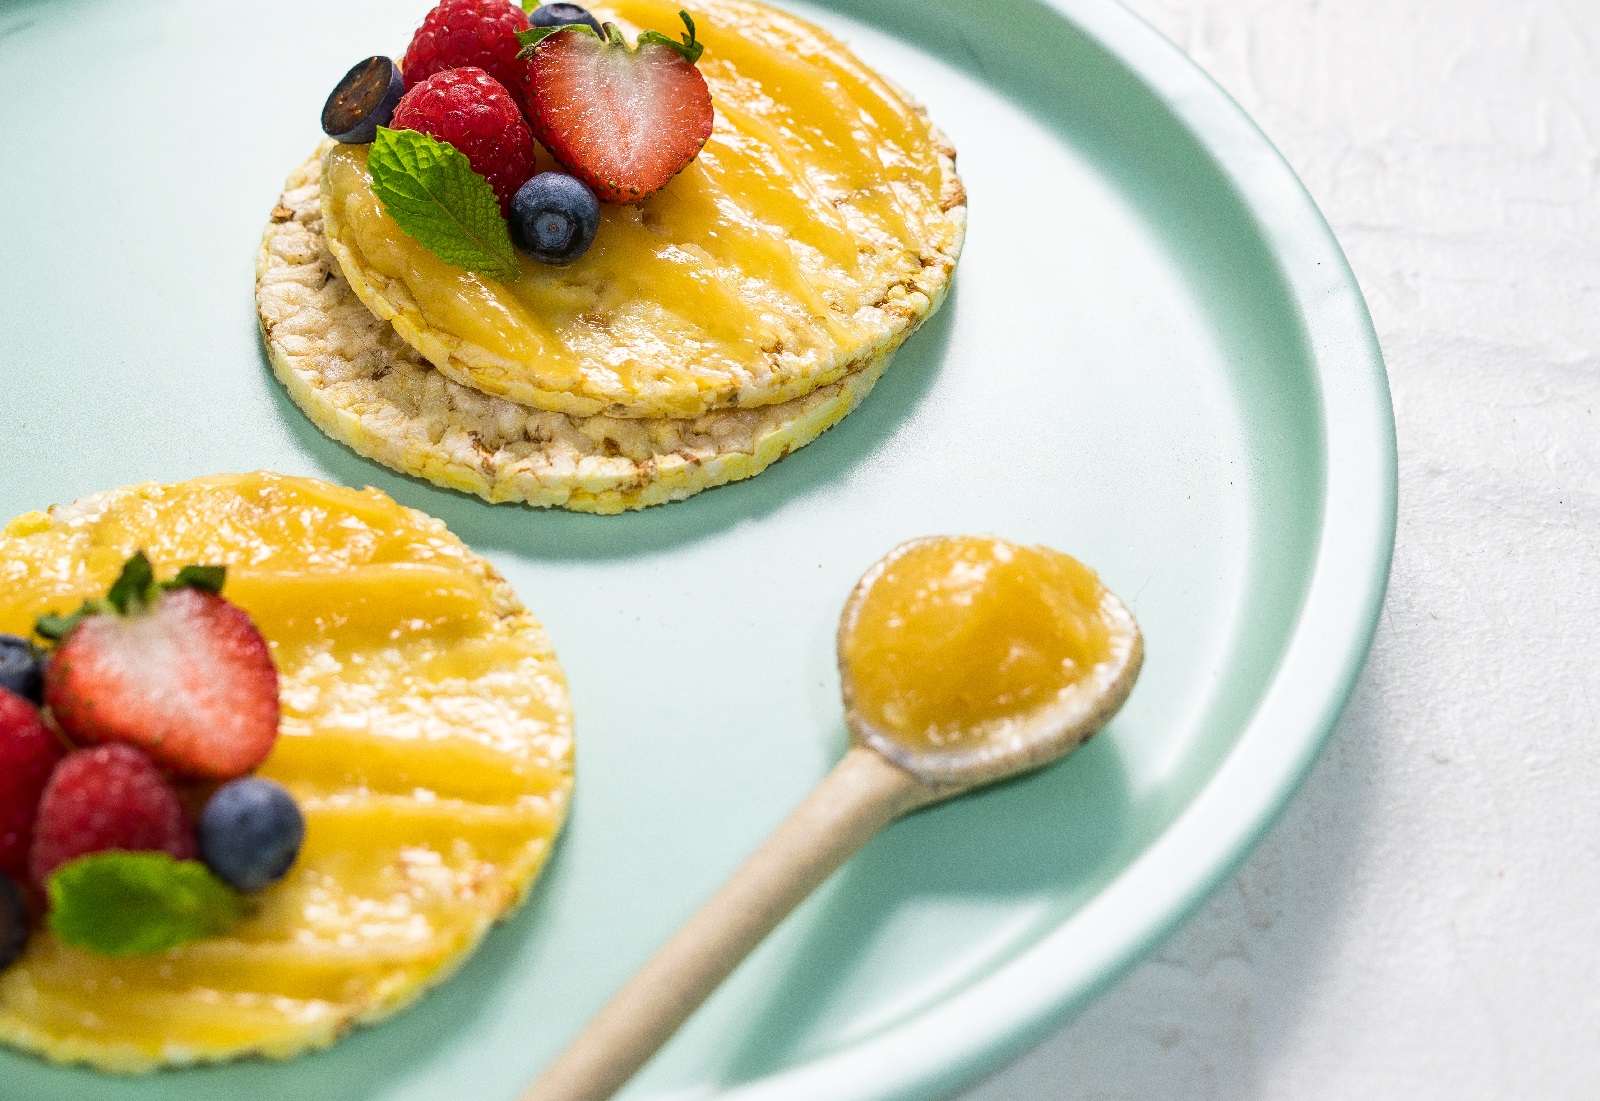 Lemon Curd, berries & mint on CORN THINS slices as a snack